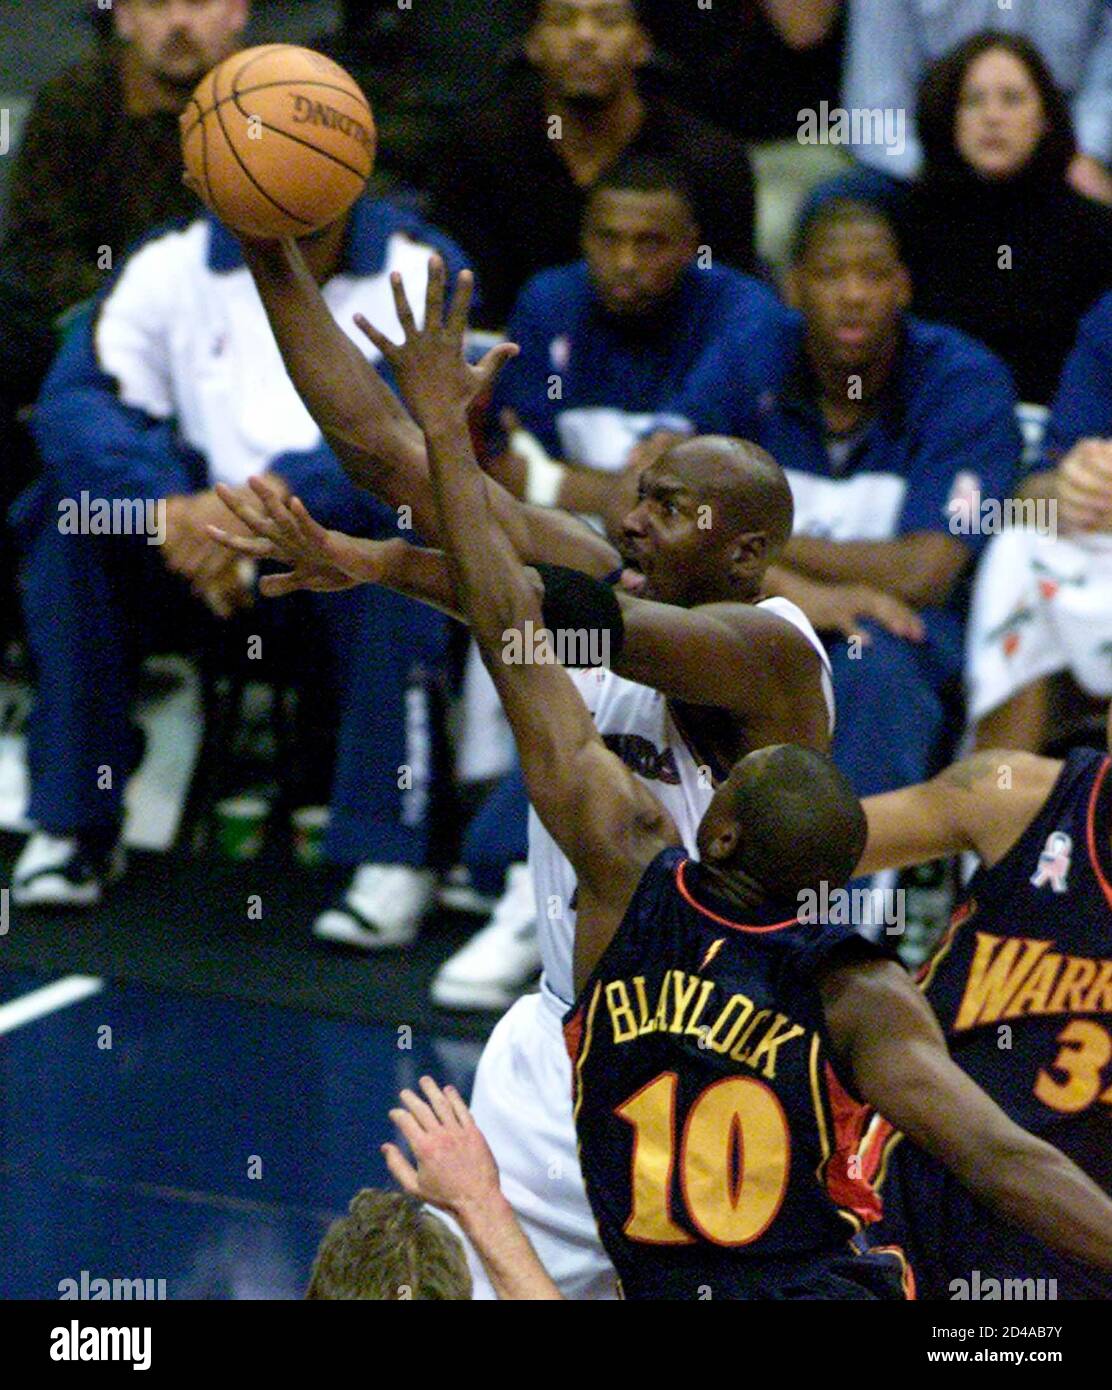 Washington Wizards' Michael Jordan drives past Golden State Warriors' Mookie  Blaylock (10) for a layup in the second quarter of their NBA game at the  MCI Center in Washington November 9, 2001.